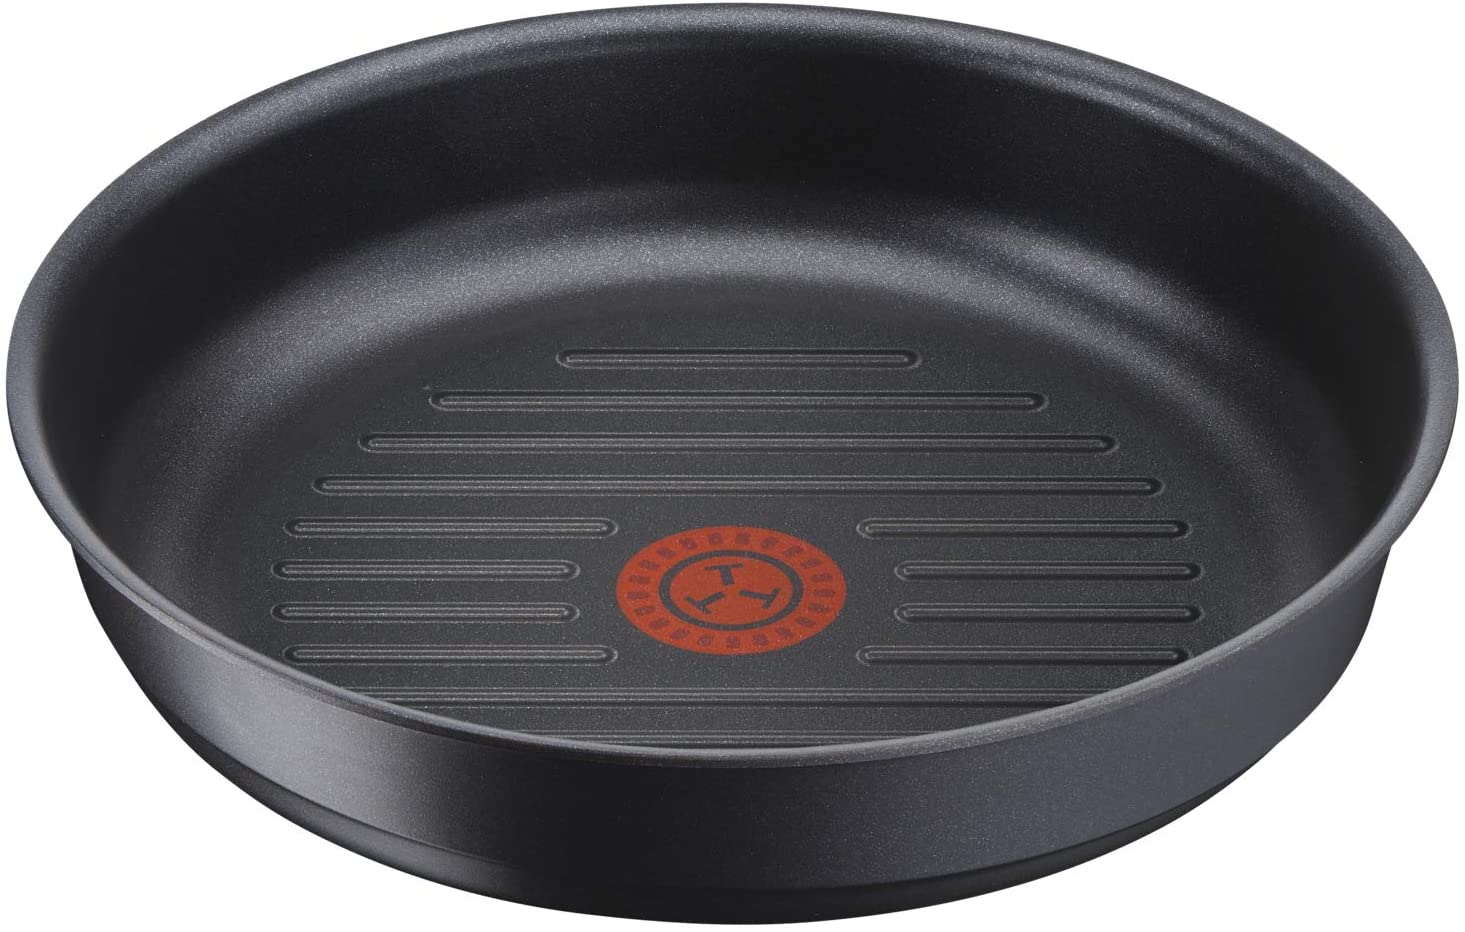 Tefal Ingenio Expertise L8564004 Grill Pan 26 cm Induction Non-Stick Coating Handle Available Separately